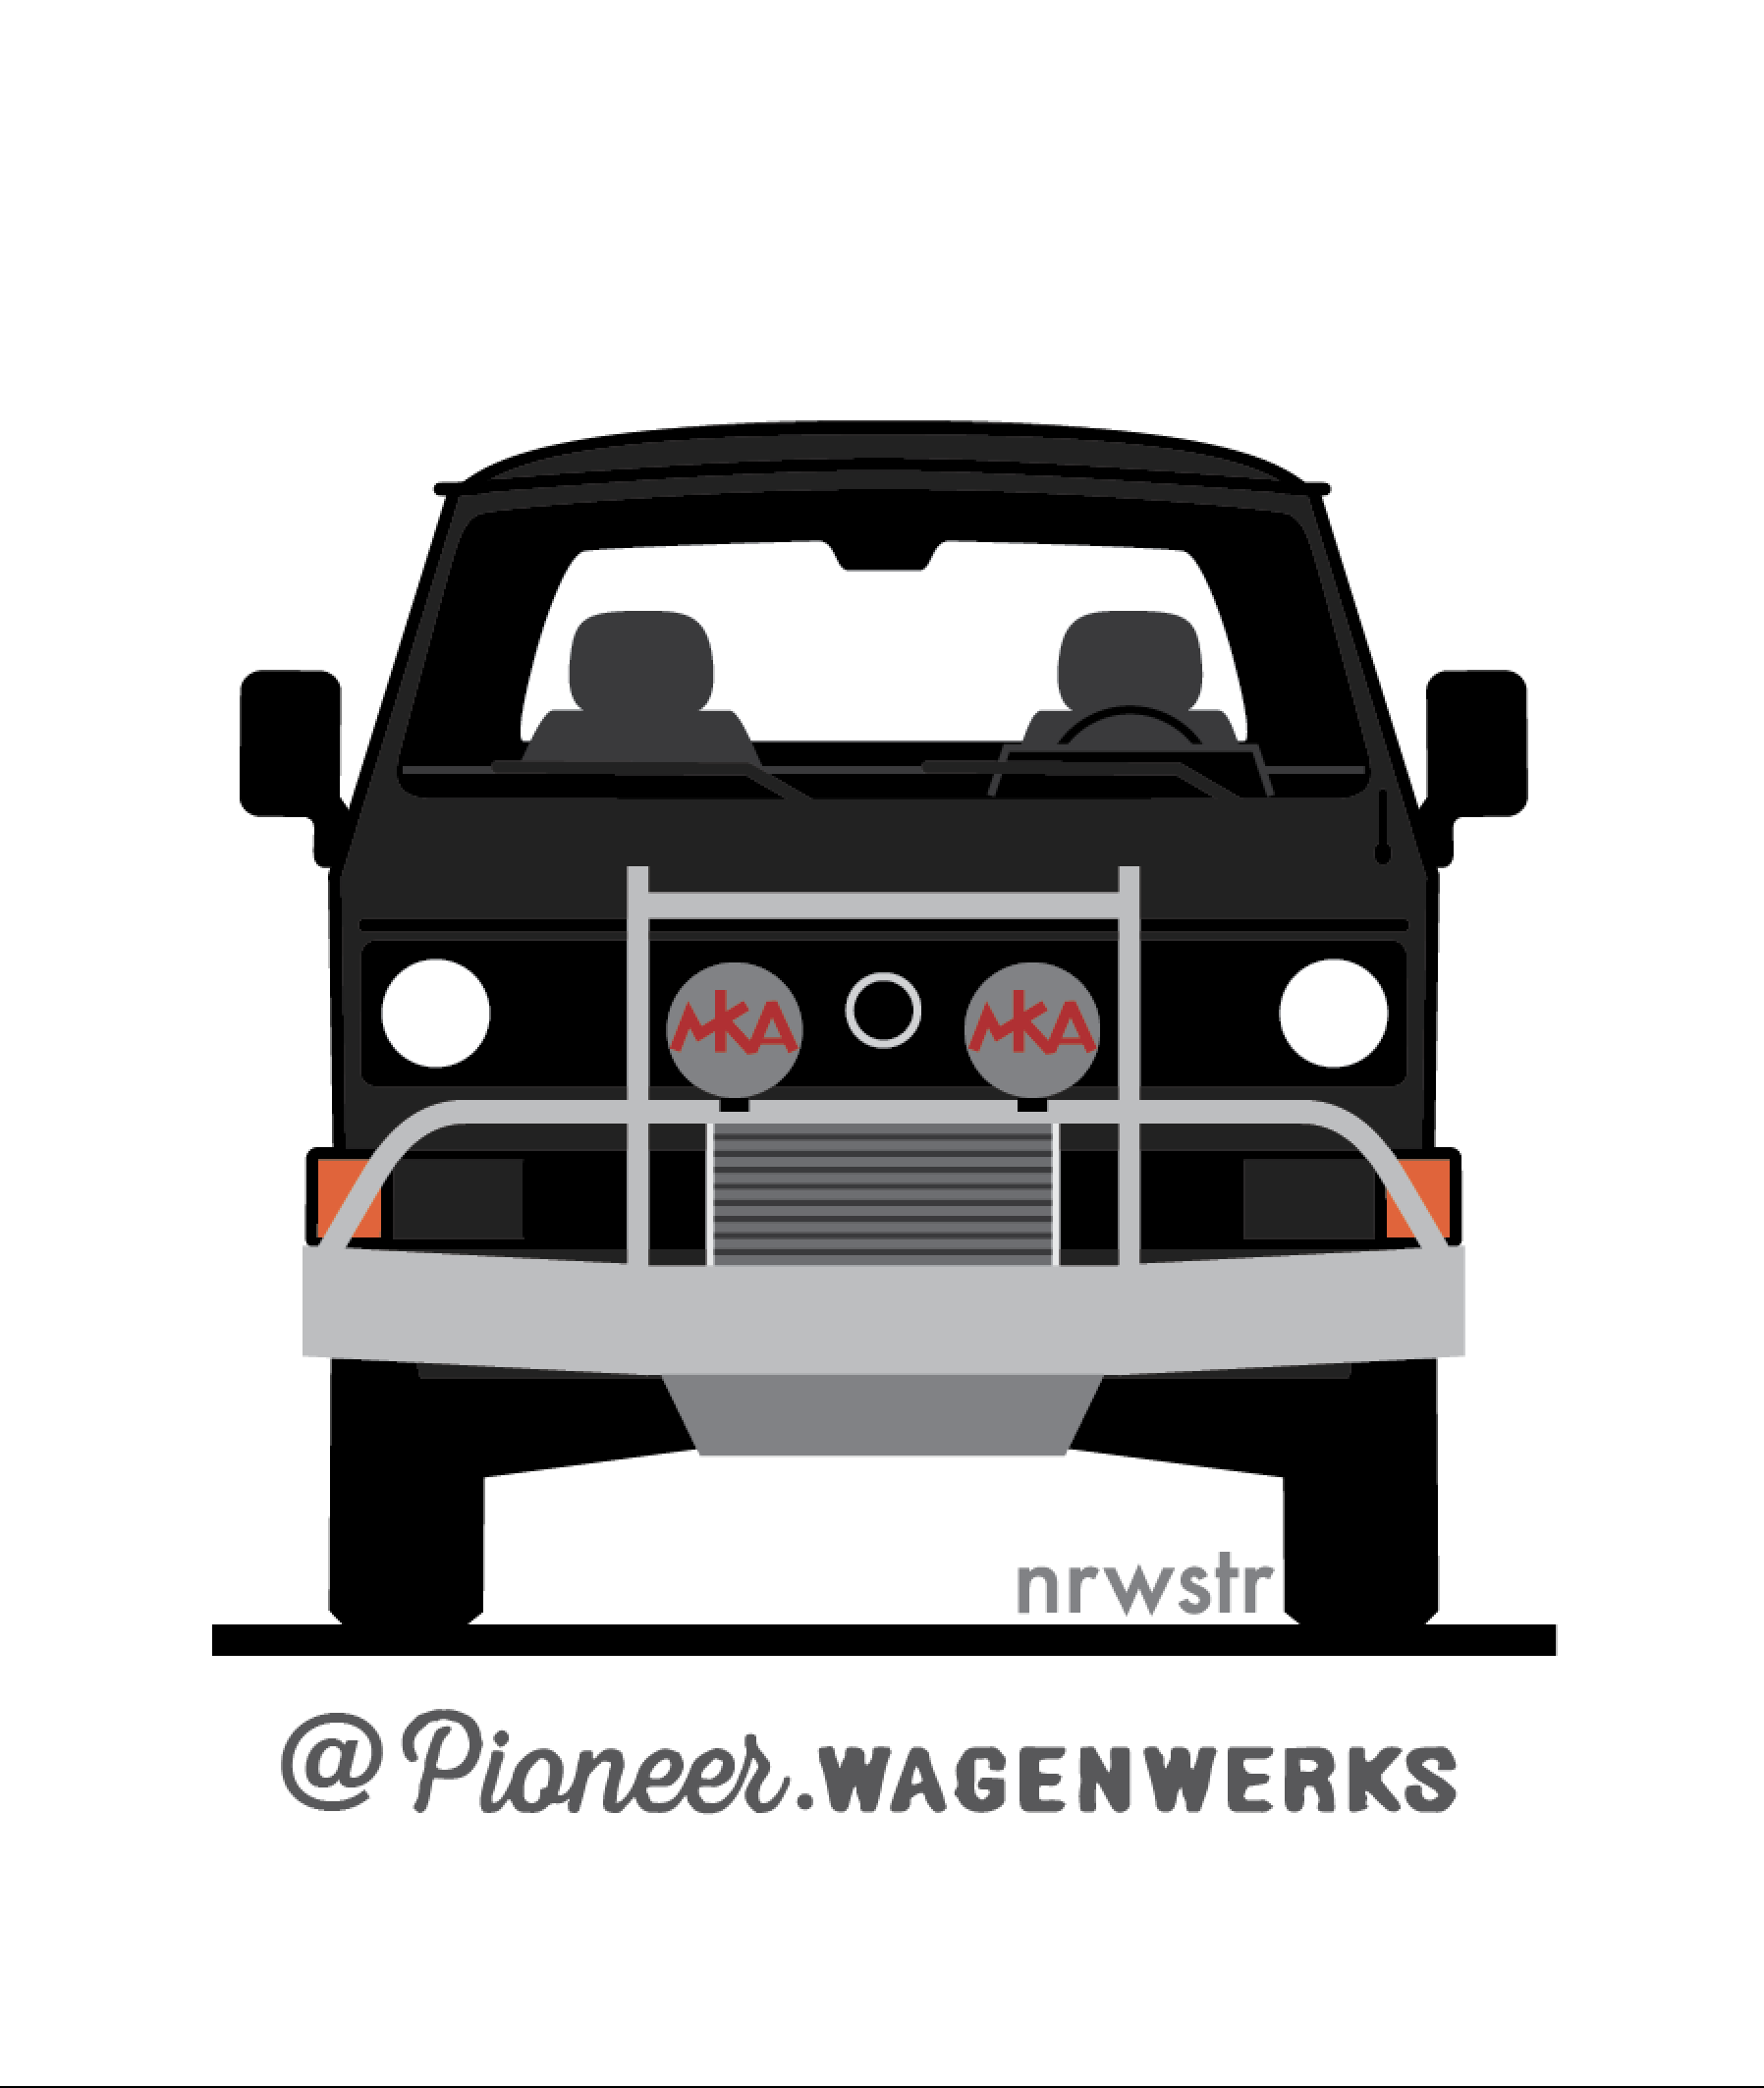 comm-pioneer.wagenwerks front view.png